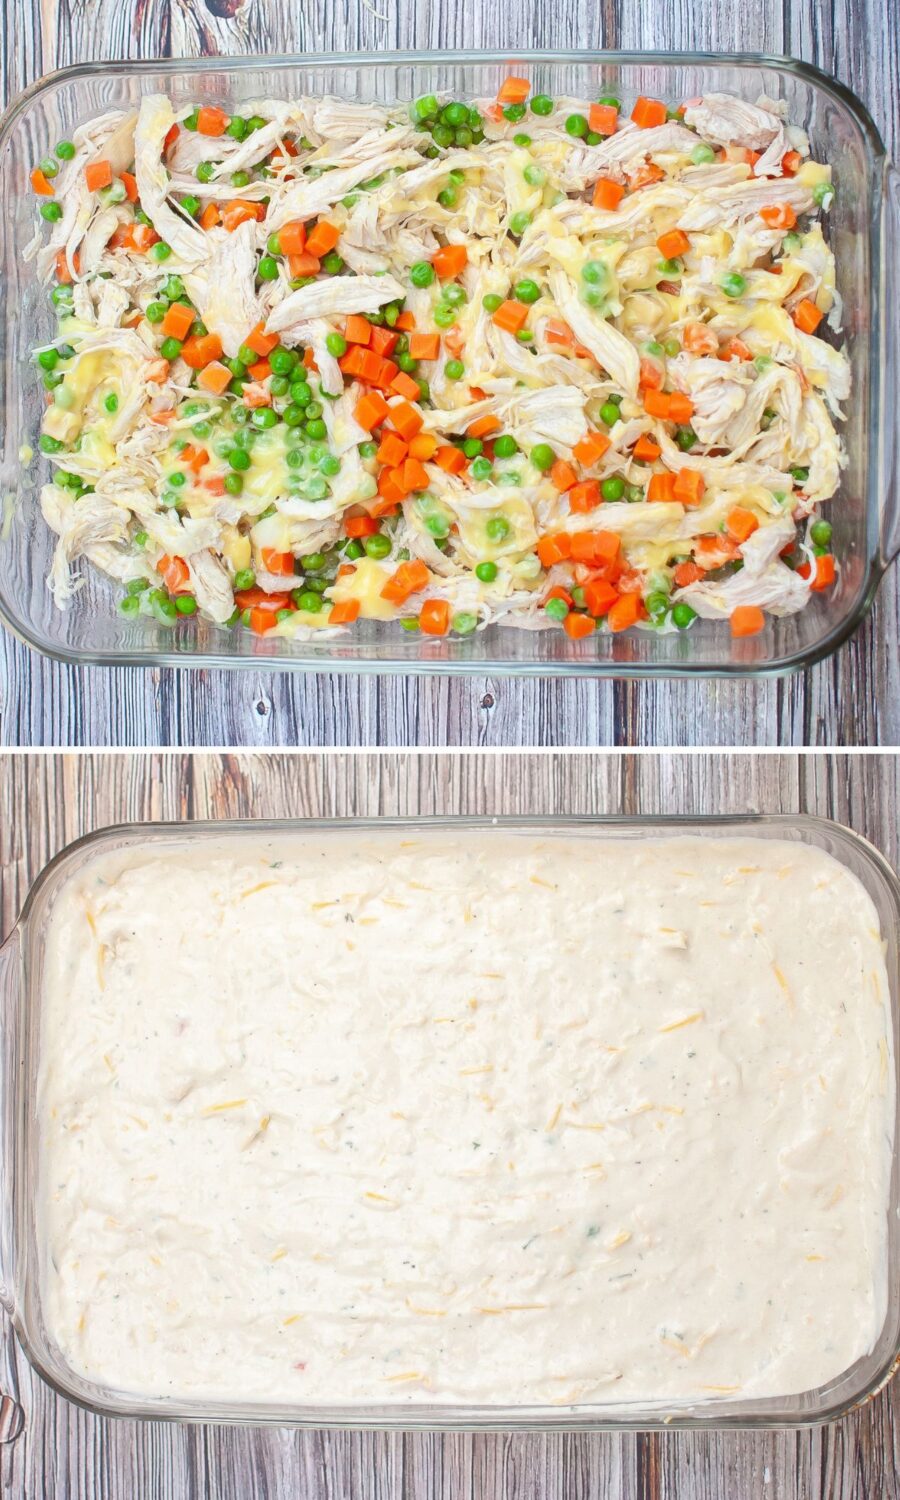 Two pictures of a casserole with chicken and vegetables.